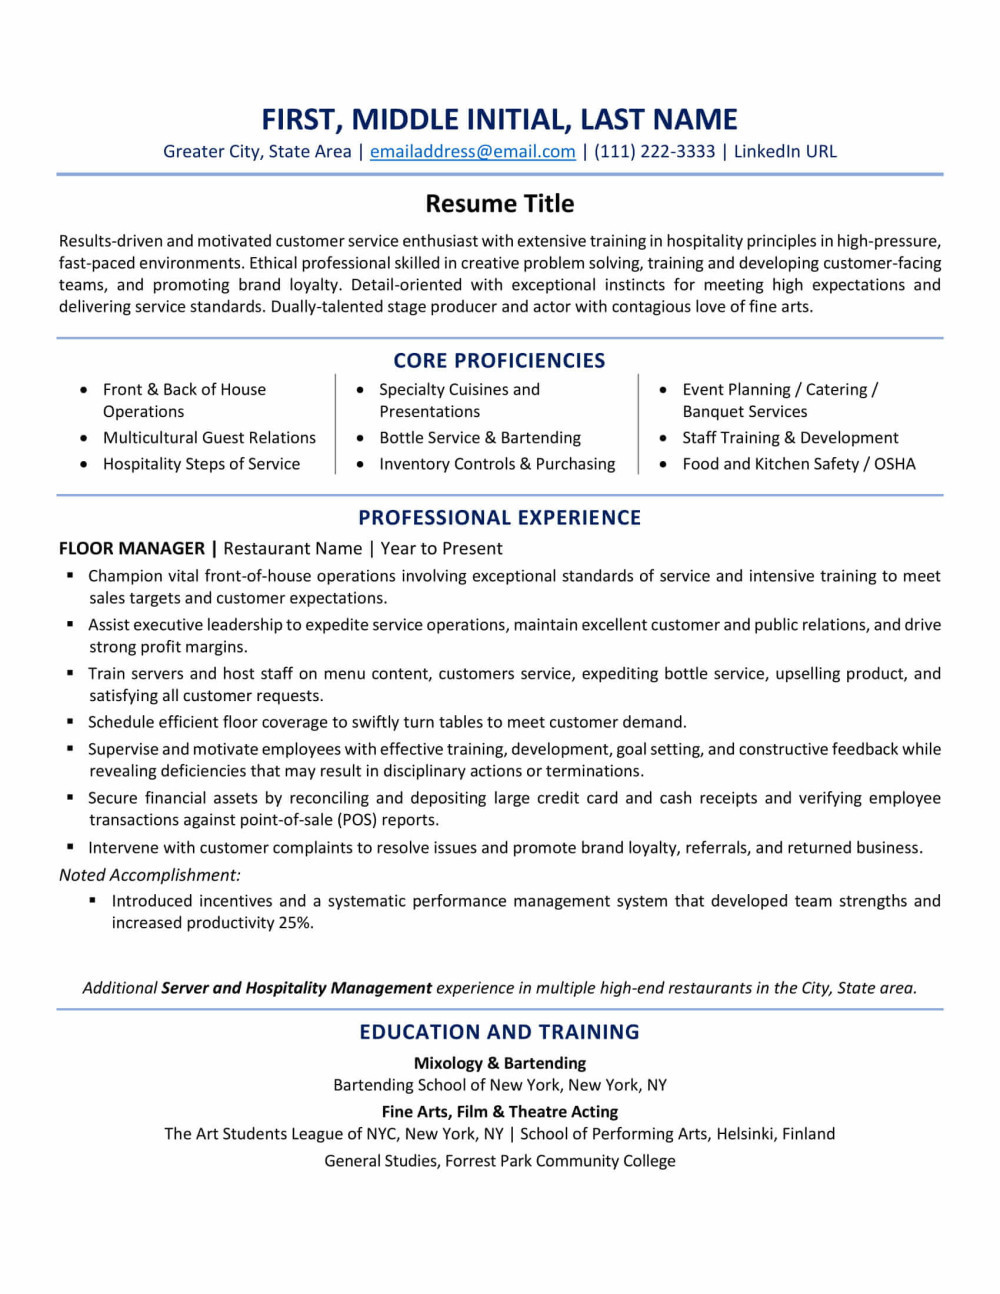 Sample Resume Returning to Work after 20 Years 7 No-fail Resume Tips for Older Workers (lancarrezekiq Examples) Zipjob